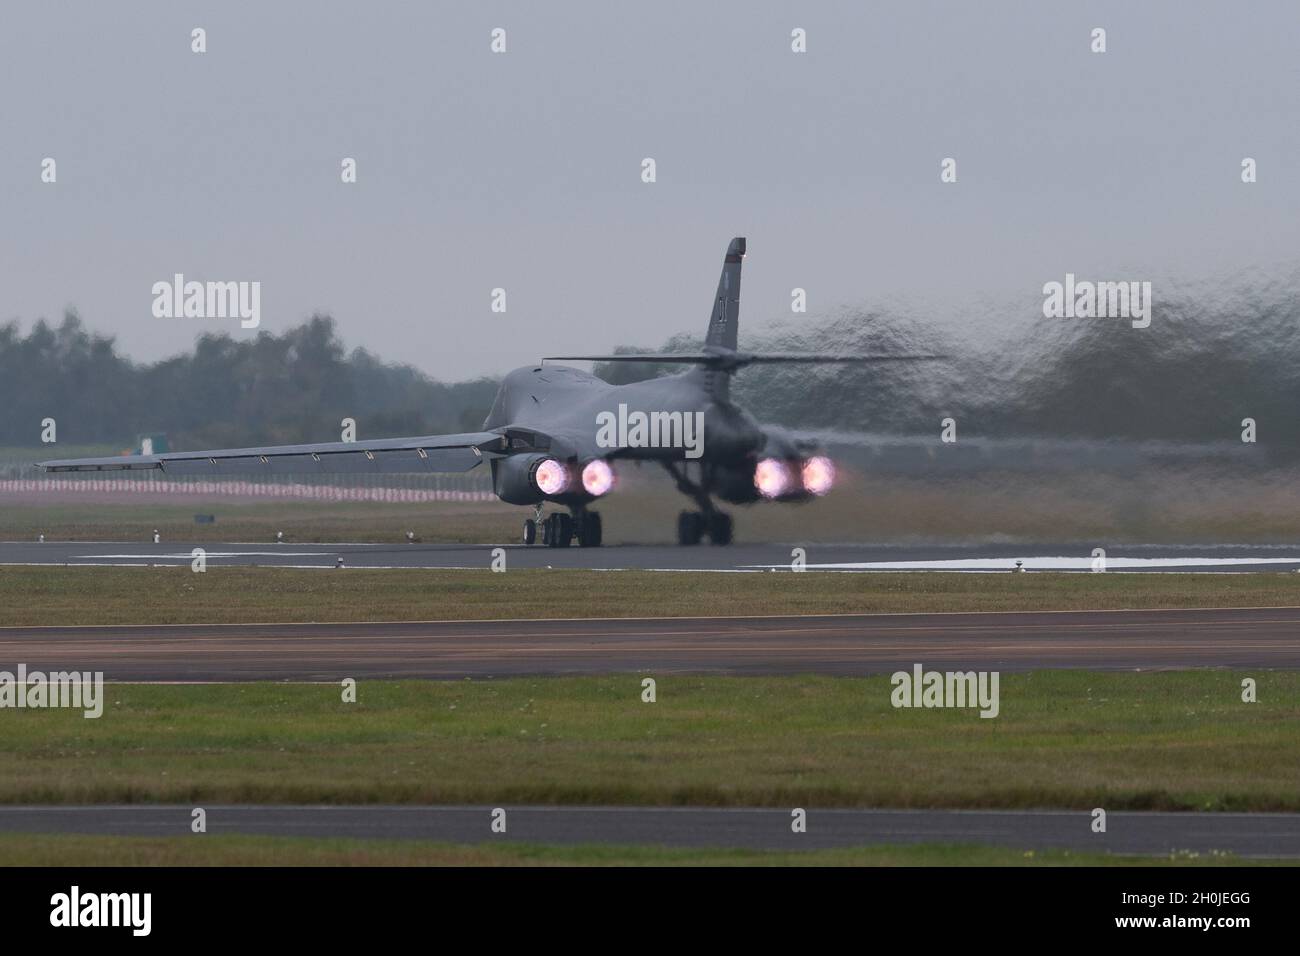 RAF FAIRFORD, KEMPSFORD, GLOUCESTERSHIRE, ENGLAND, WEDNESDAY 13TH OCTOBER 2021 : A United States Air Force B1 Bomber takes off from RAF Fairford in Gloucestershire, England on Saturday 11th September 2021. (Credit: Robert Smith | MI News ) Credit: MI News & Sport /Alamy Live News Stock Photo